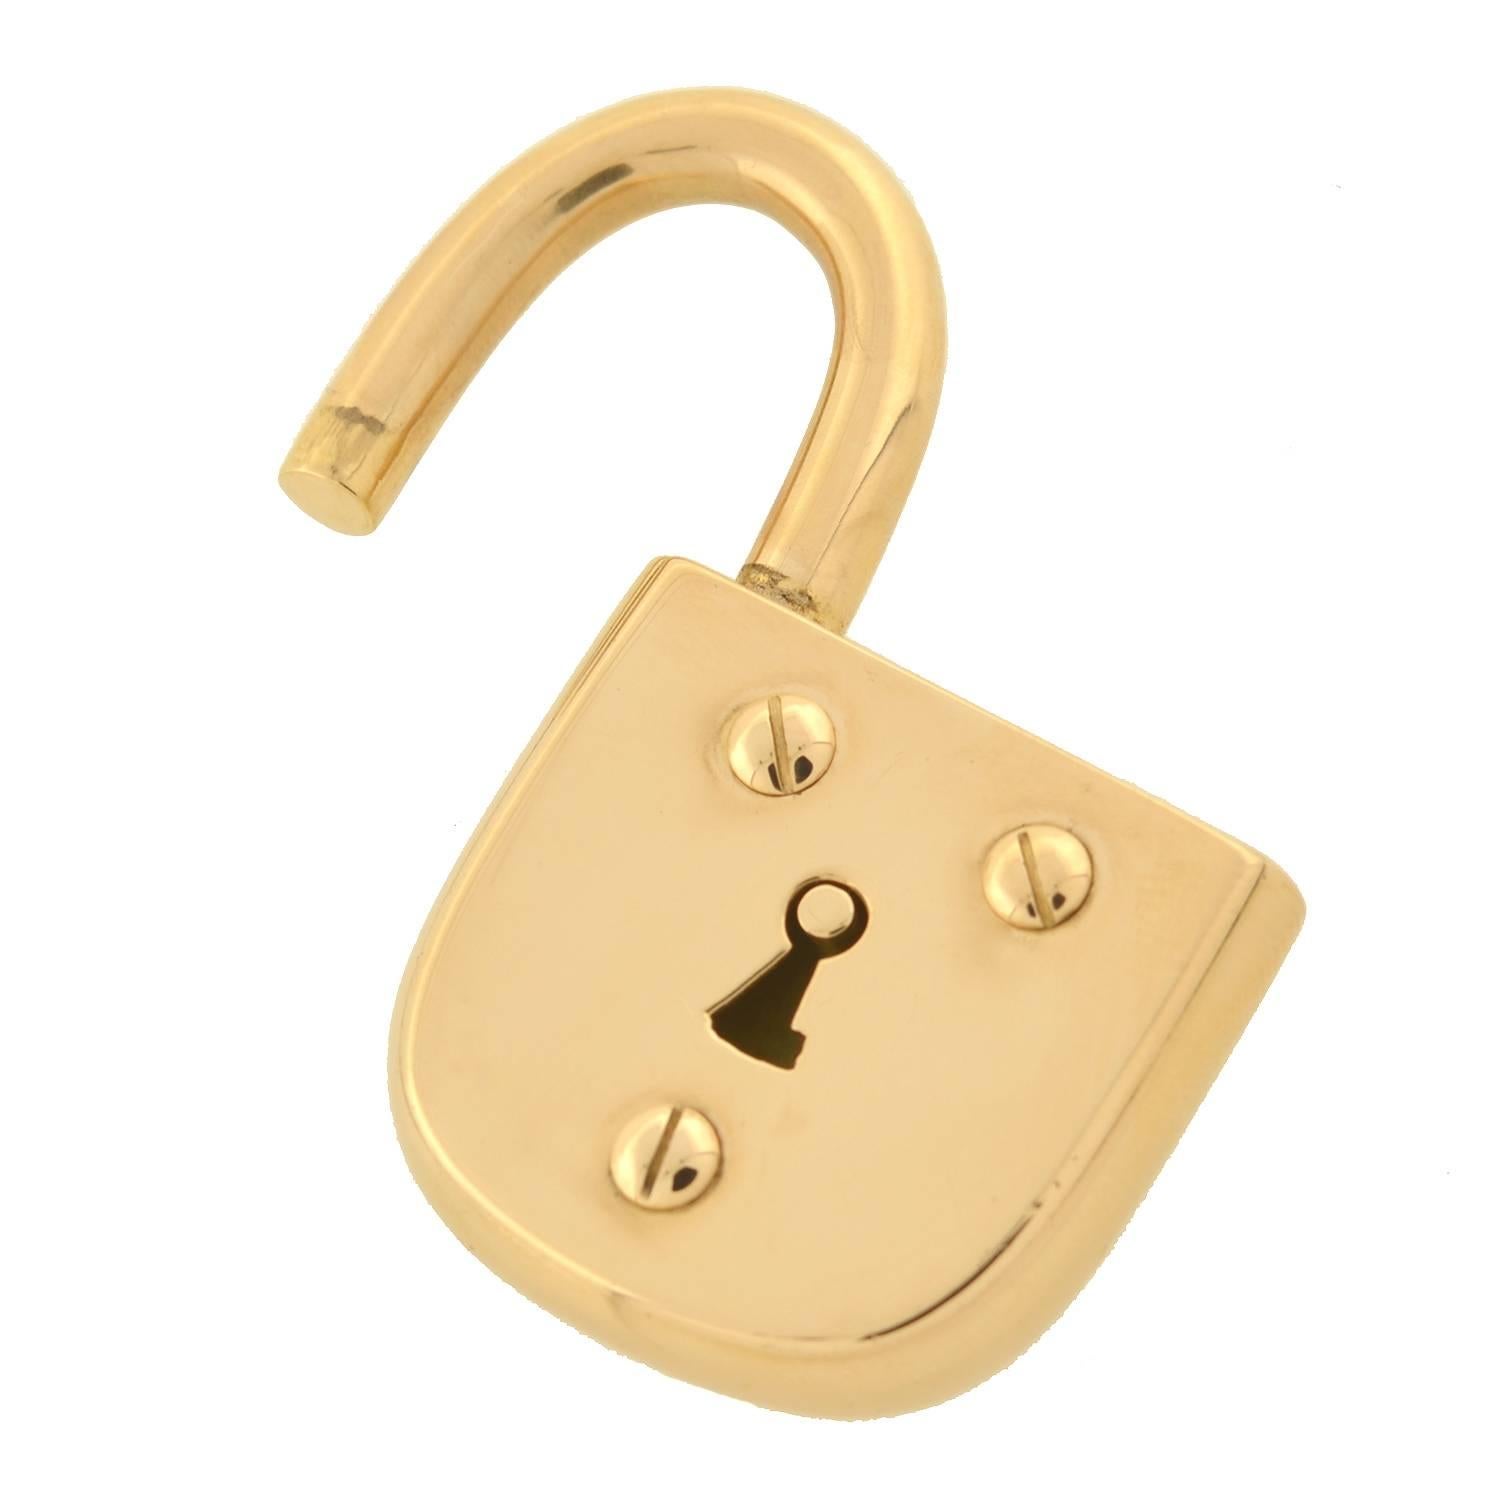 This impressive padlock is a signed estate piece by Tiffany & Co.! The pendant has a stylish and functional padlock motif crafted in 18kt gold, and is quite substantial both in size and appearance. Reminiscent of a Victorian era padlock, the